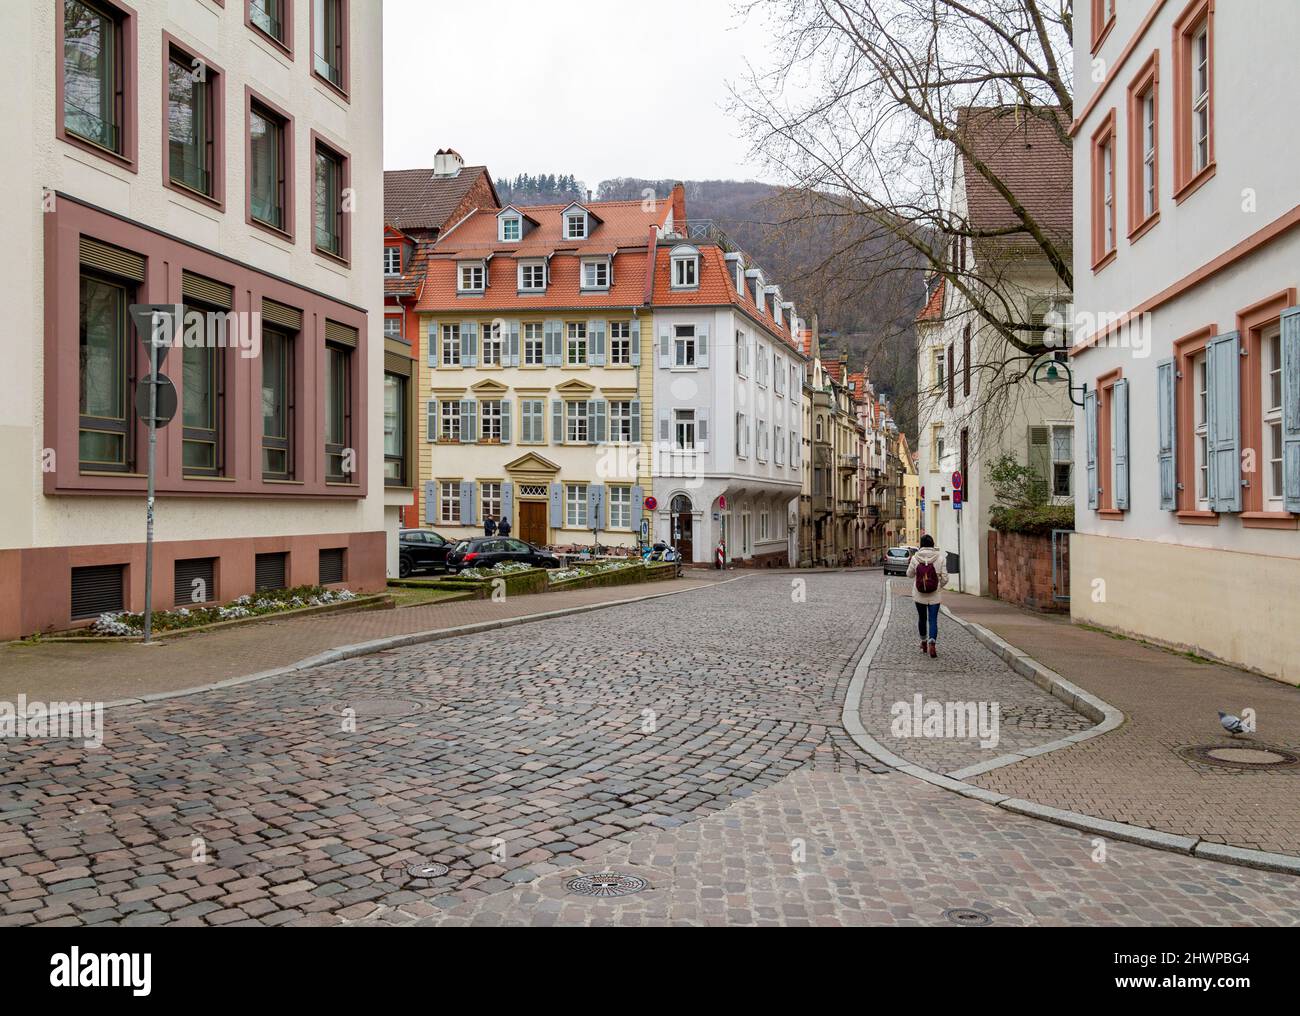 Impression of Heidelberg in Germany at winter time Stock Photo